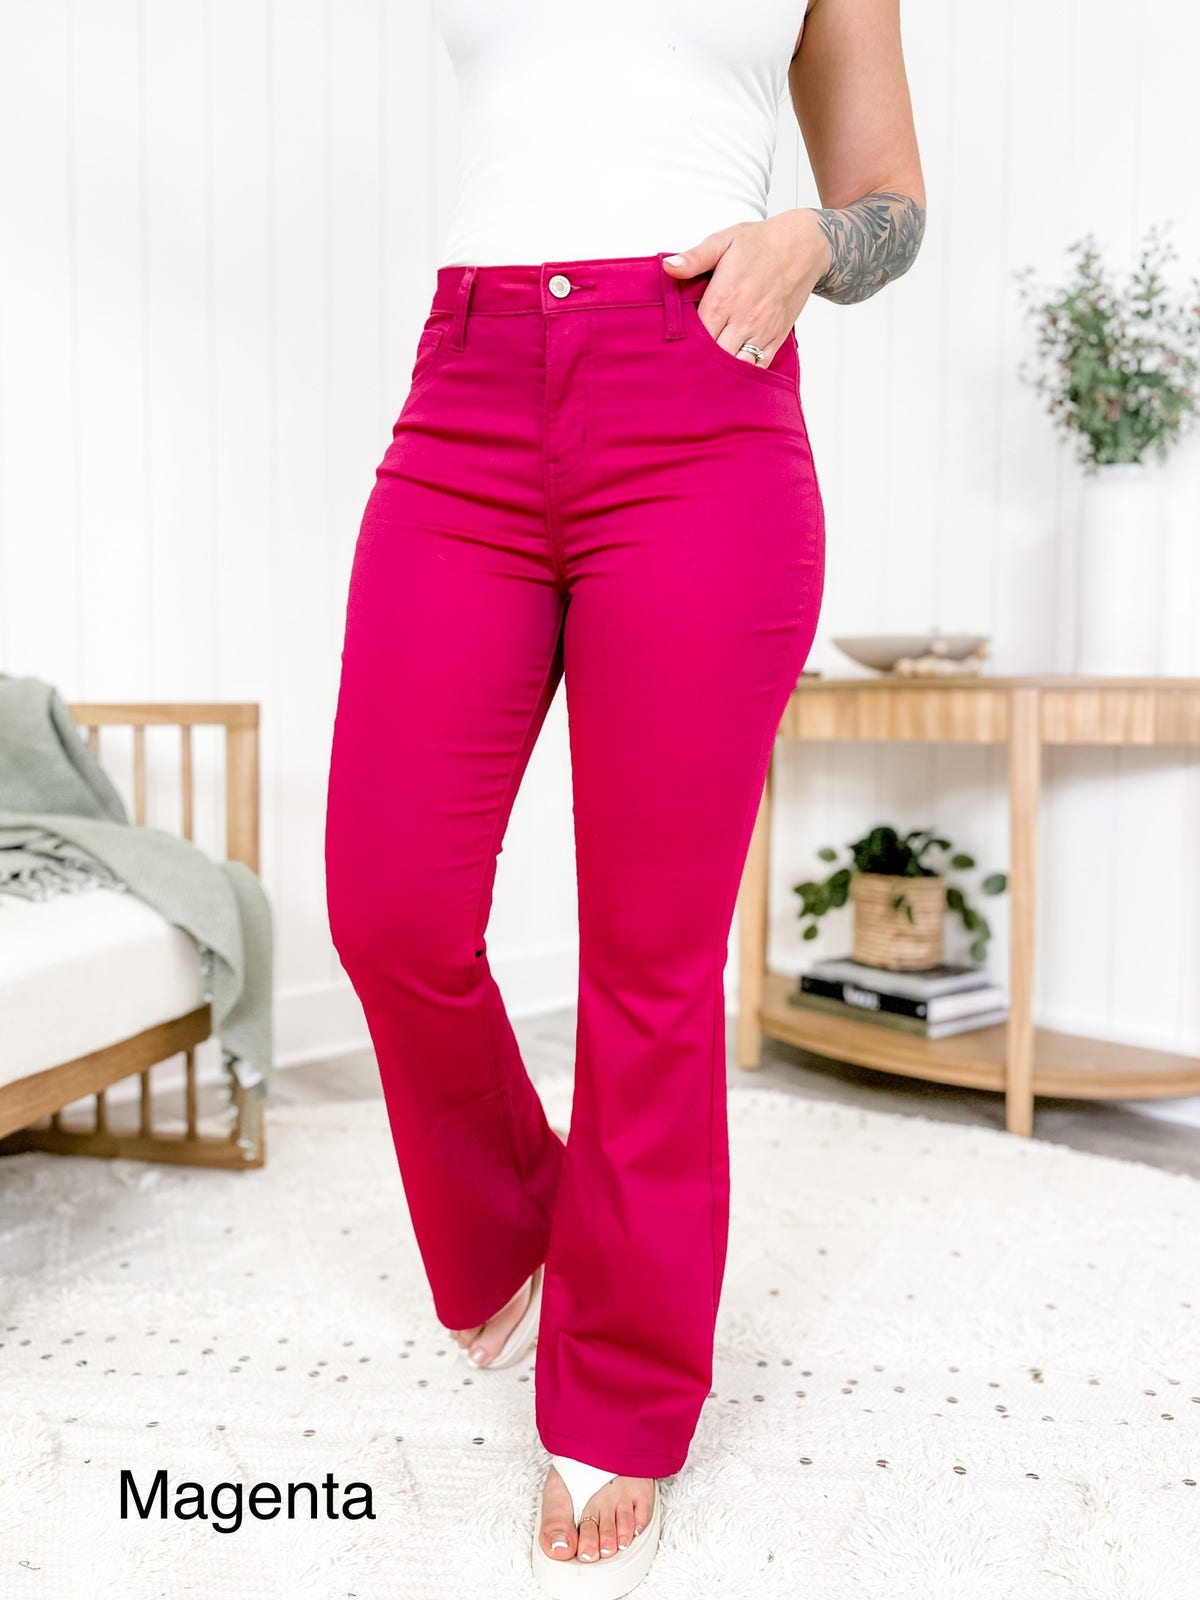 Not Your Mama's High Rise Jean